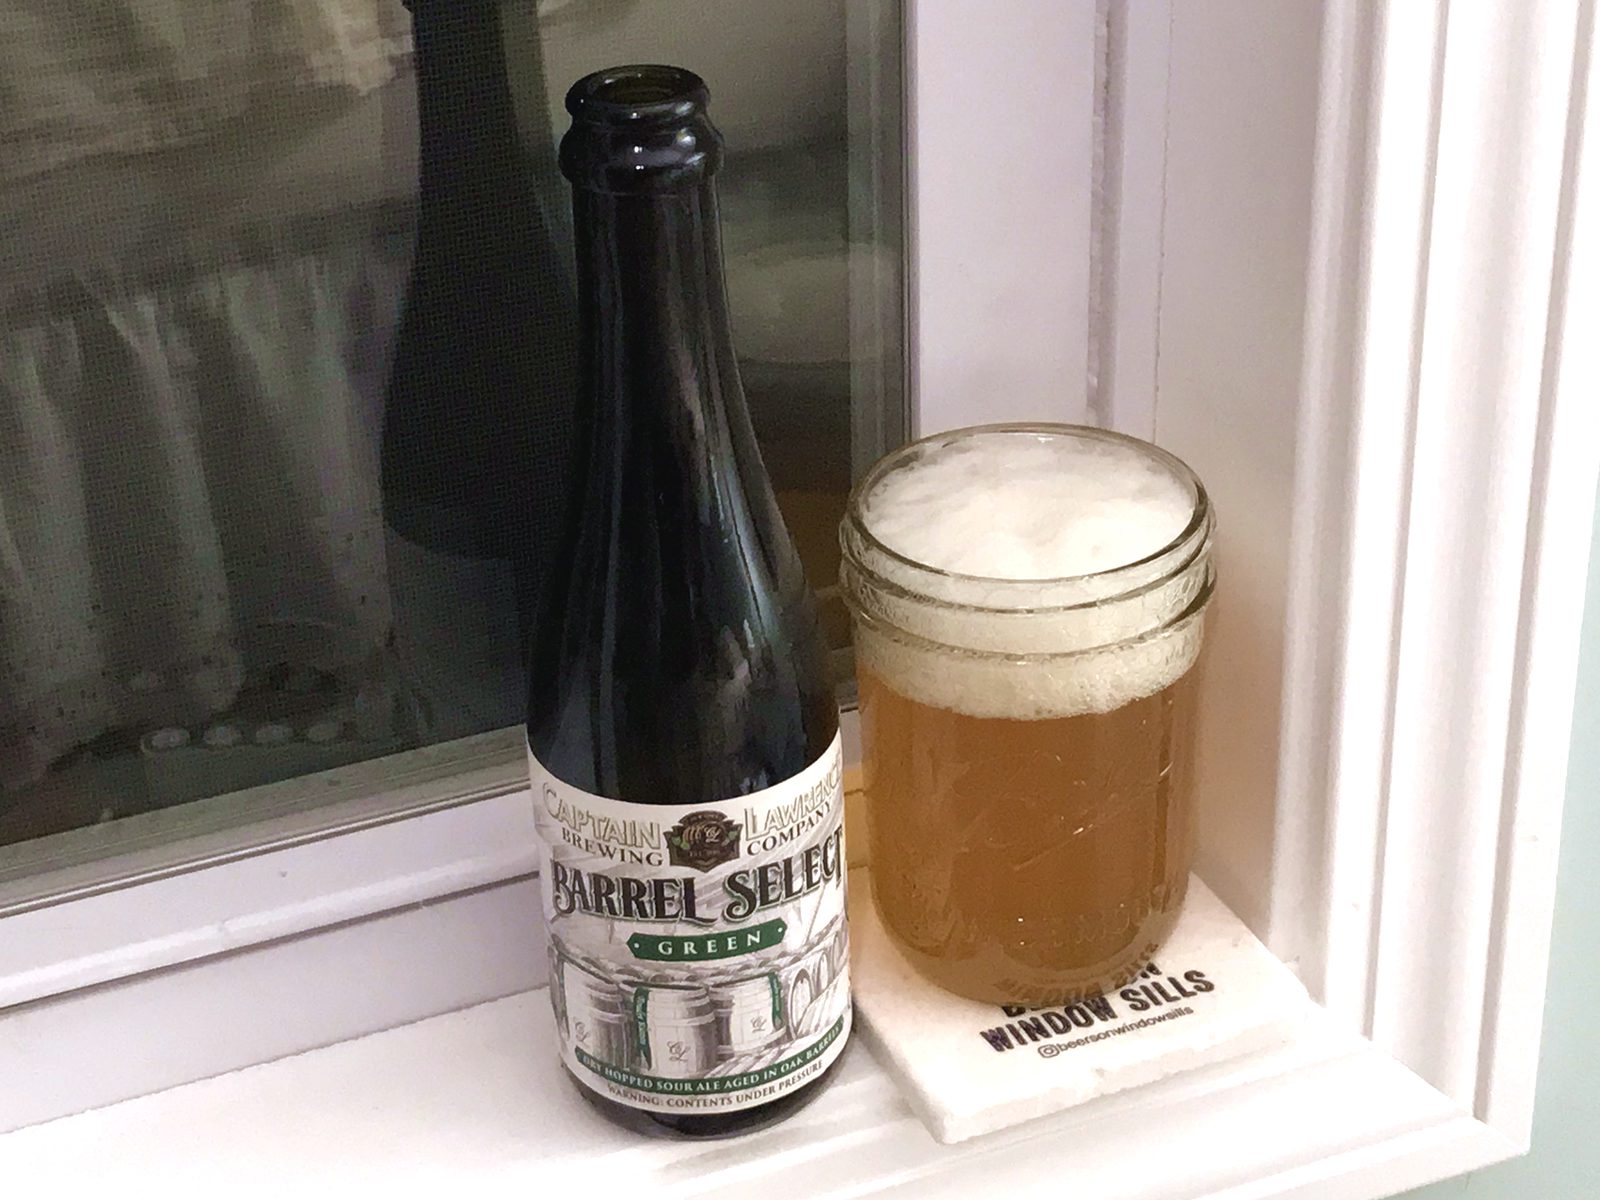 Captain Lawrence Brewing Company: Barrel Select Green